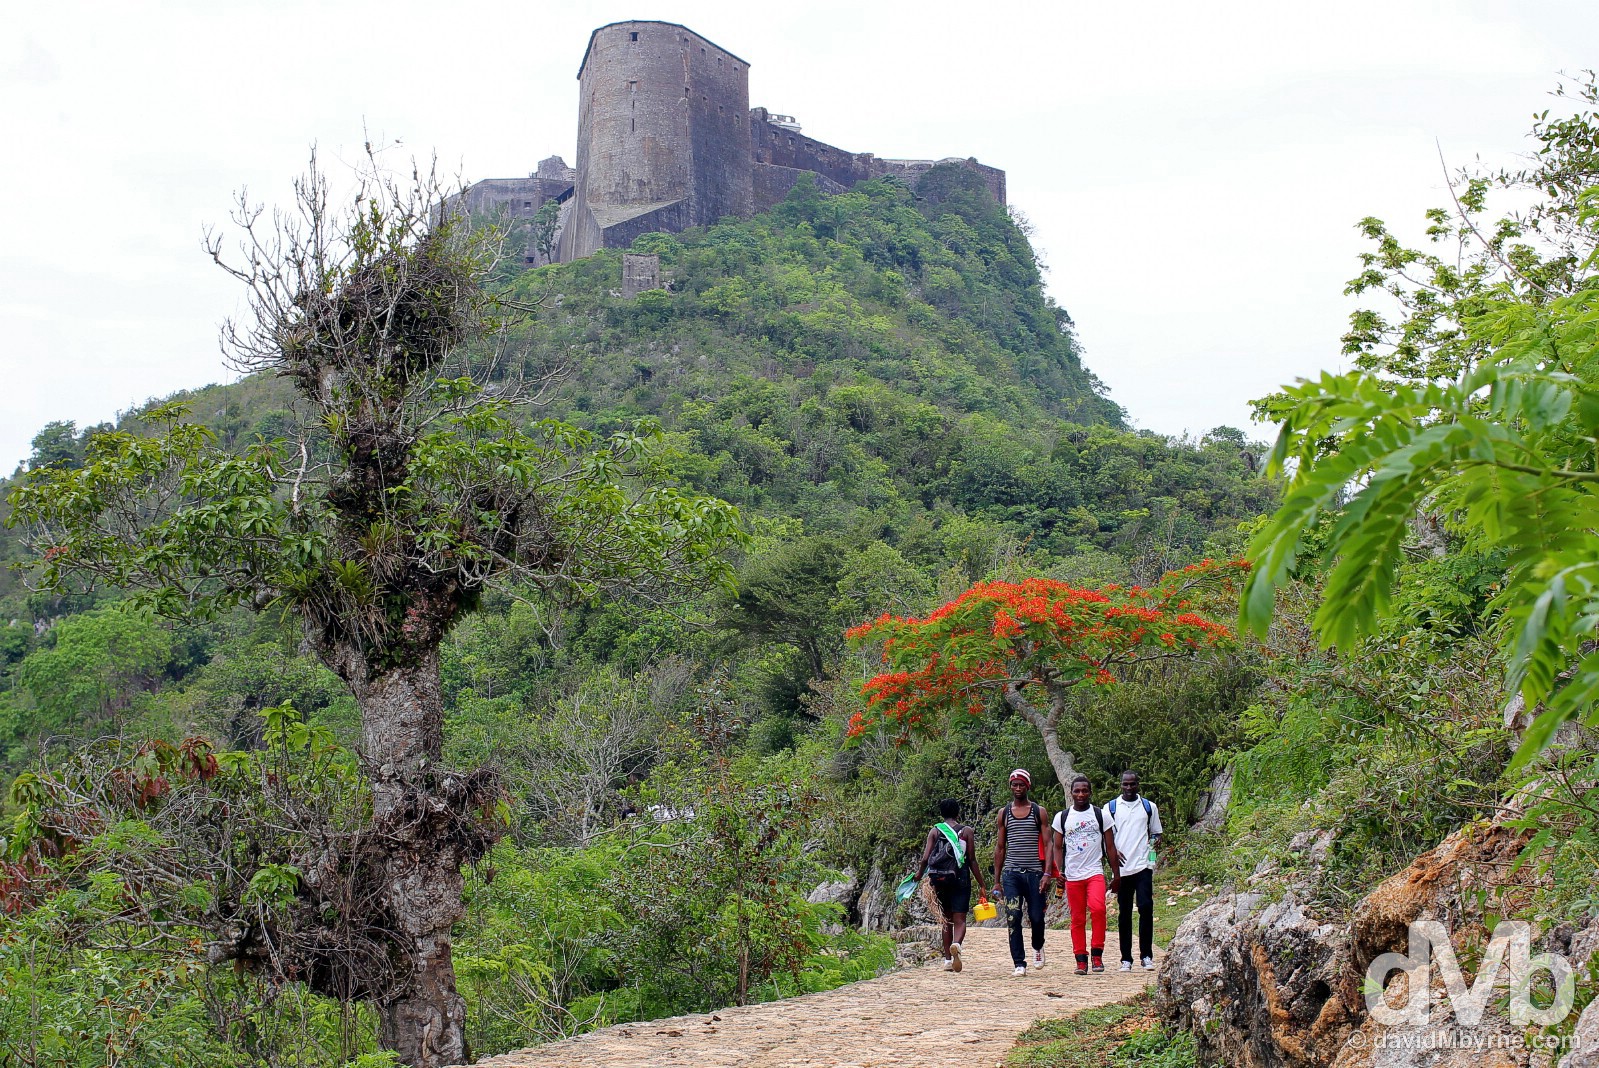 On the path to the UNESCO-listed Citadelle Laferrière in northern Haiti, Hispaniola, Greater Antilles. May 22, 2015.